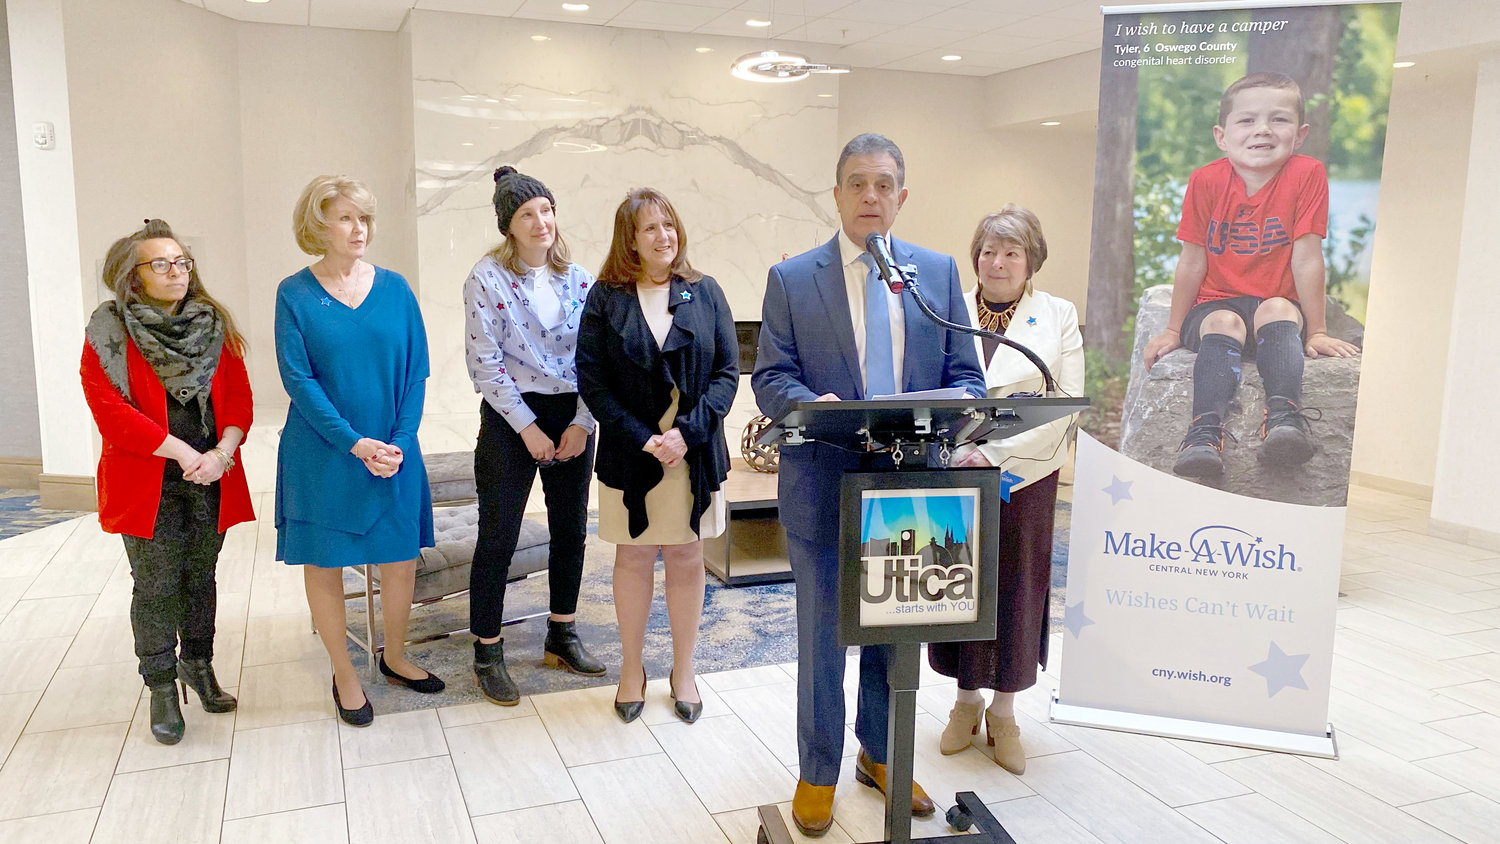 Utica Mayor Robert Palmieri, joined by his wife Susan, representatives with Make-A-Wish Central New York and Delta Hotels by Marriott, announced the local Make-A-Wish chapter as the beneficiary of the 2023 Mayor’s Benefit Gala.